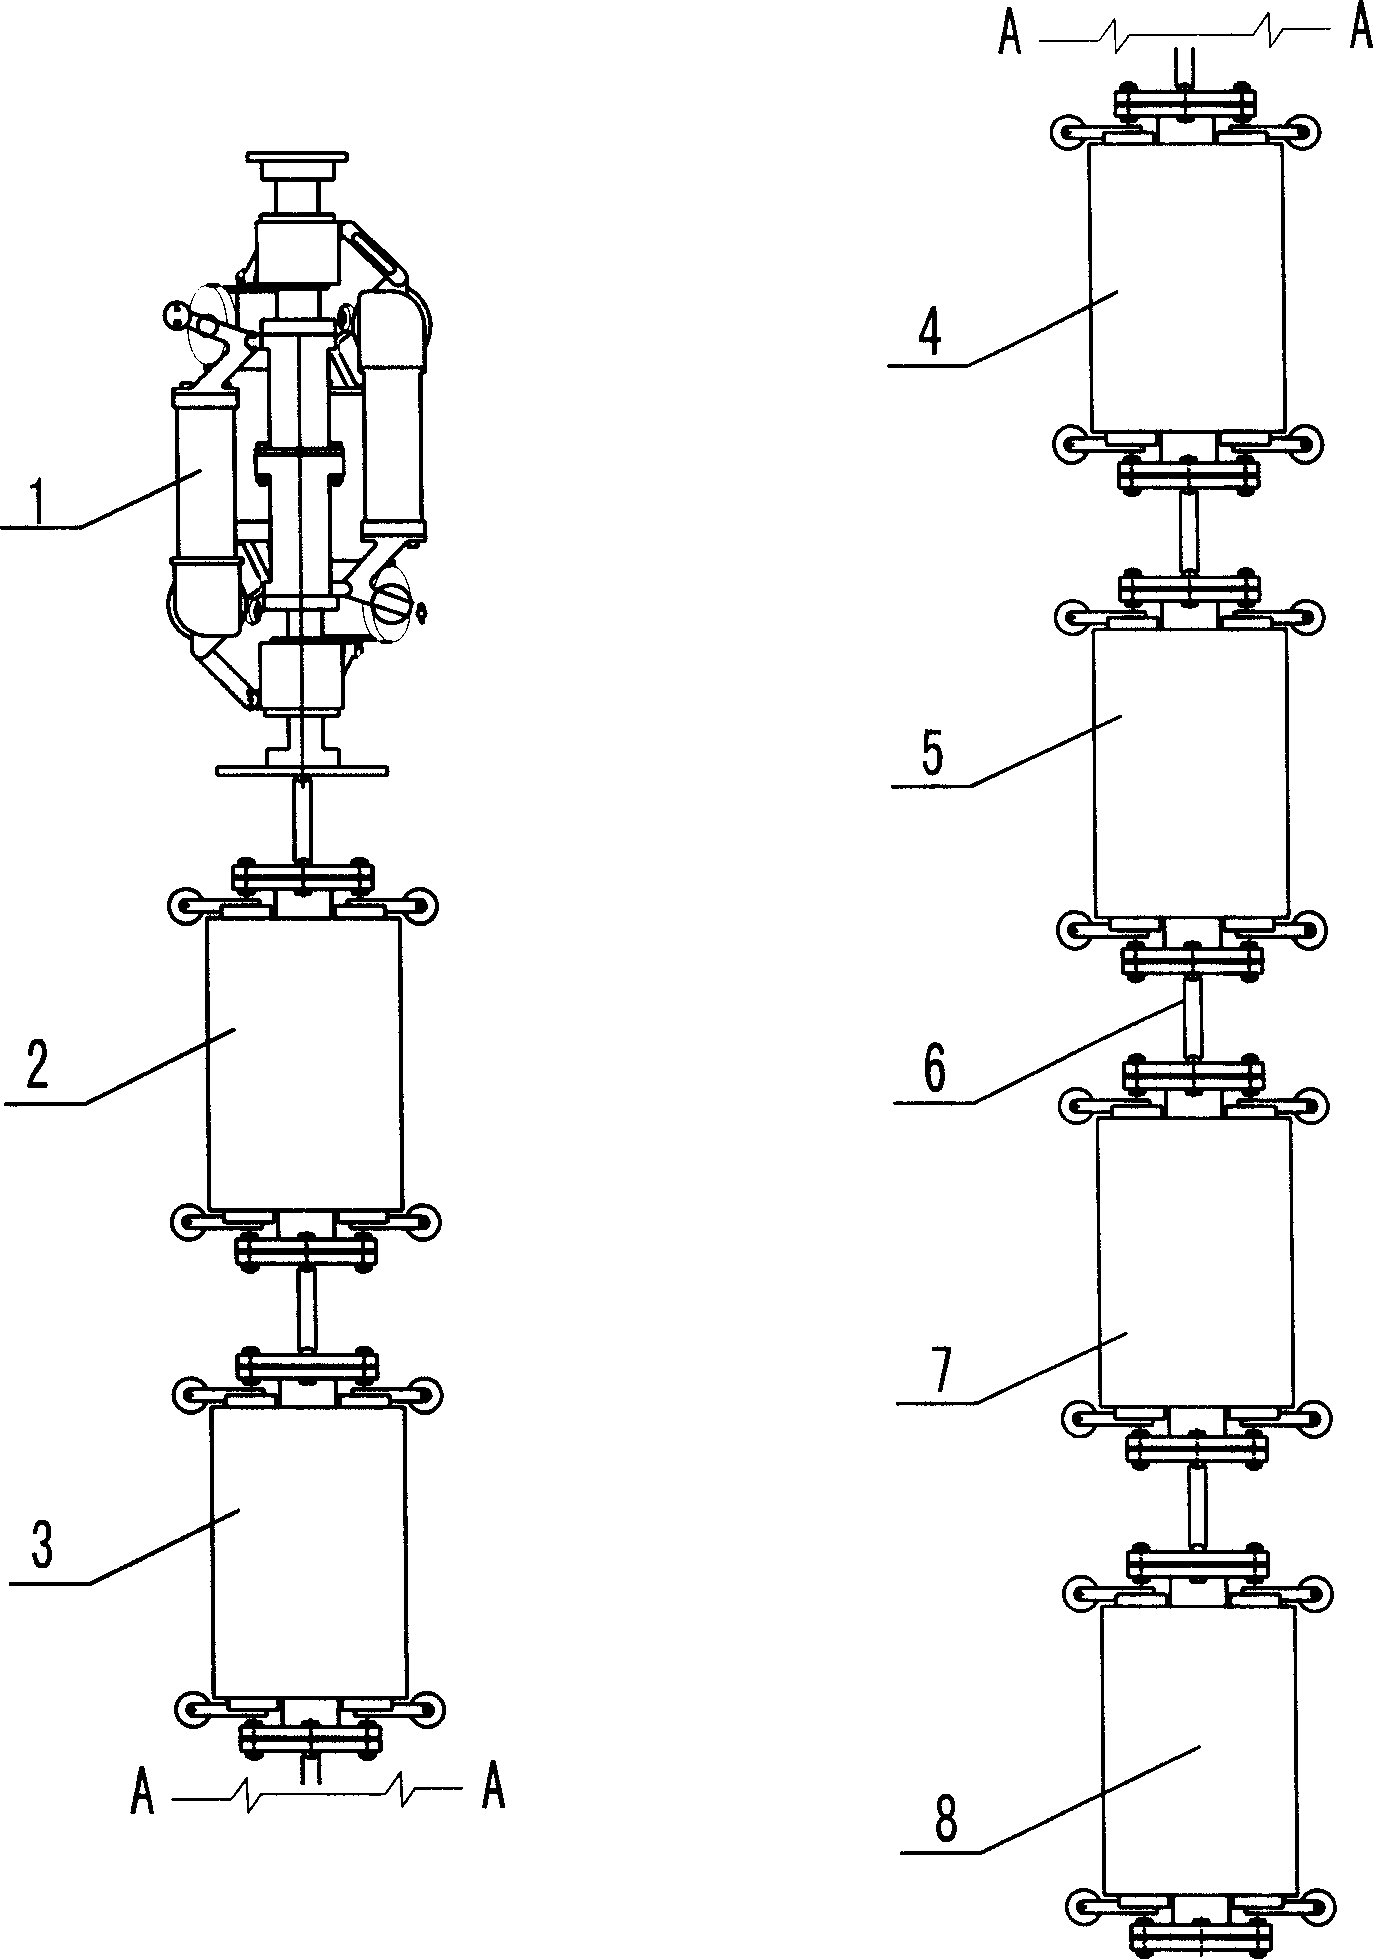 Subsea oil and gas pipeline detecting and locating apparatus and process